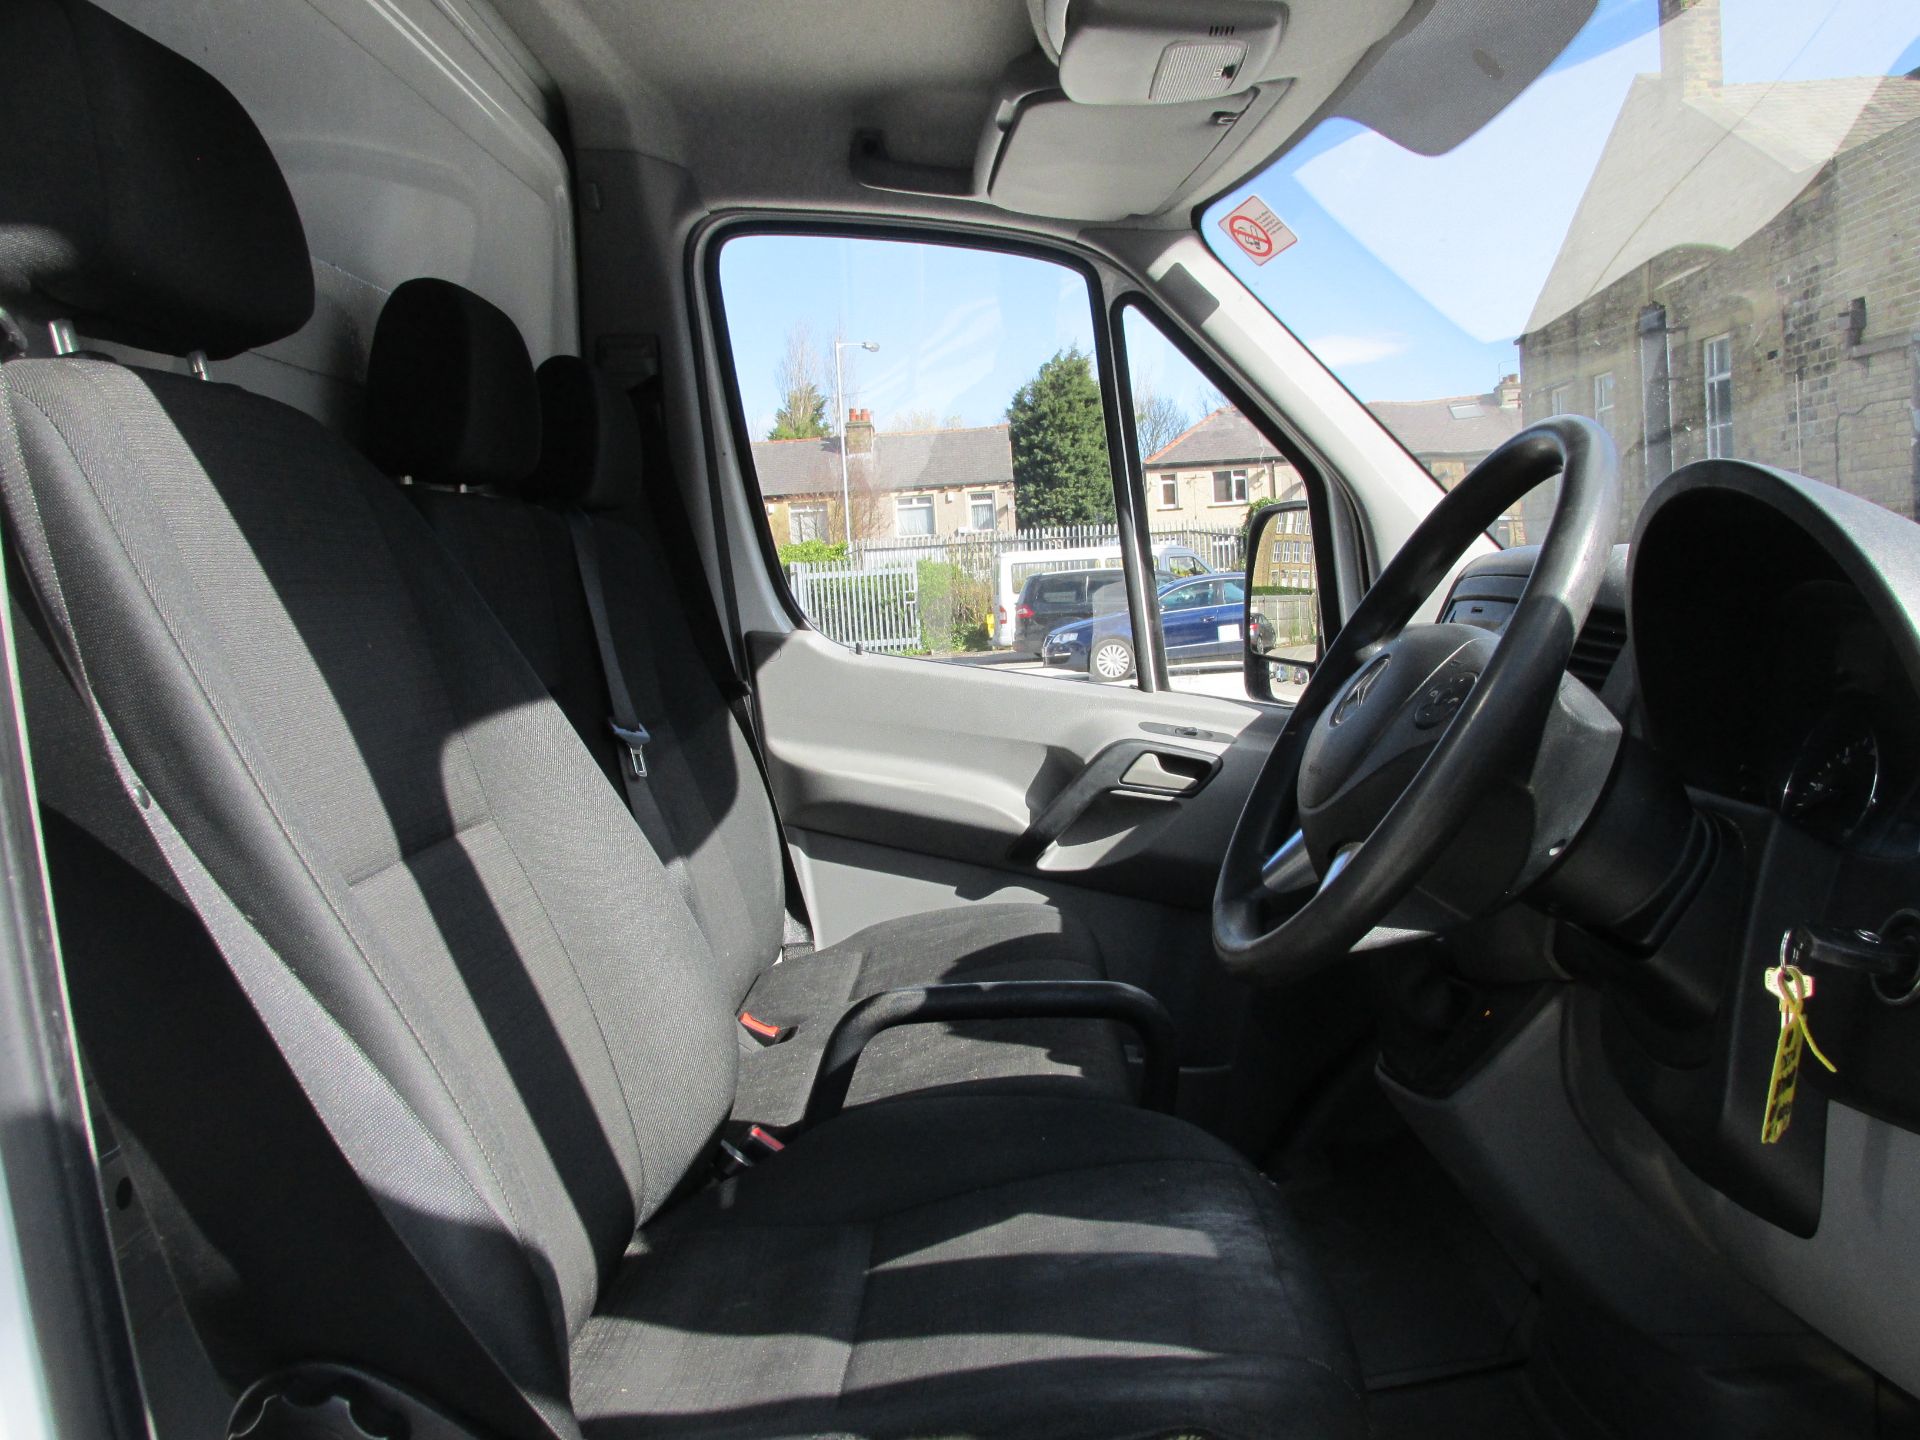 2014 Mercedes sprinter 313 Cdi dropside - 128630 Miles Warranted - Image 8 of 9